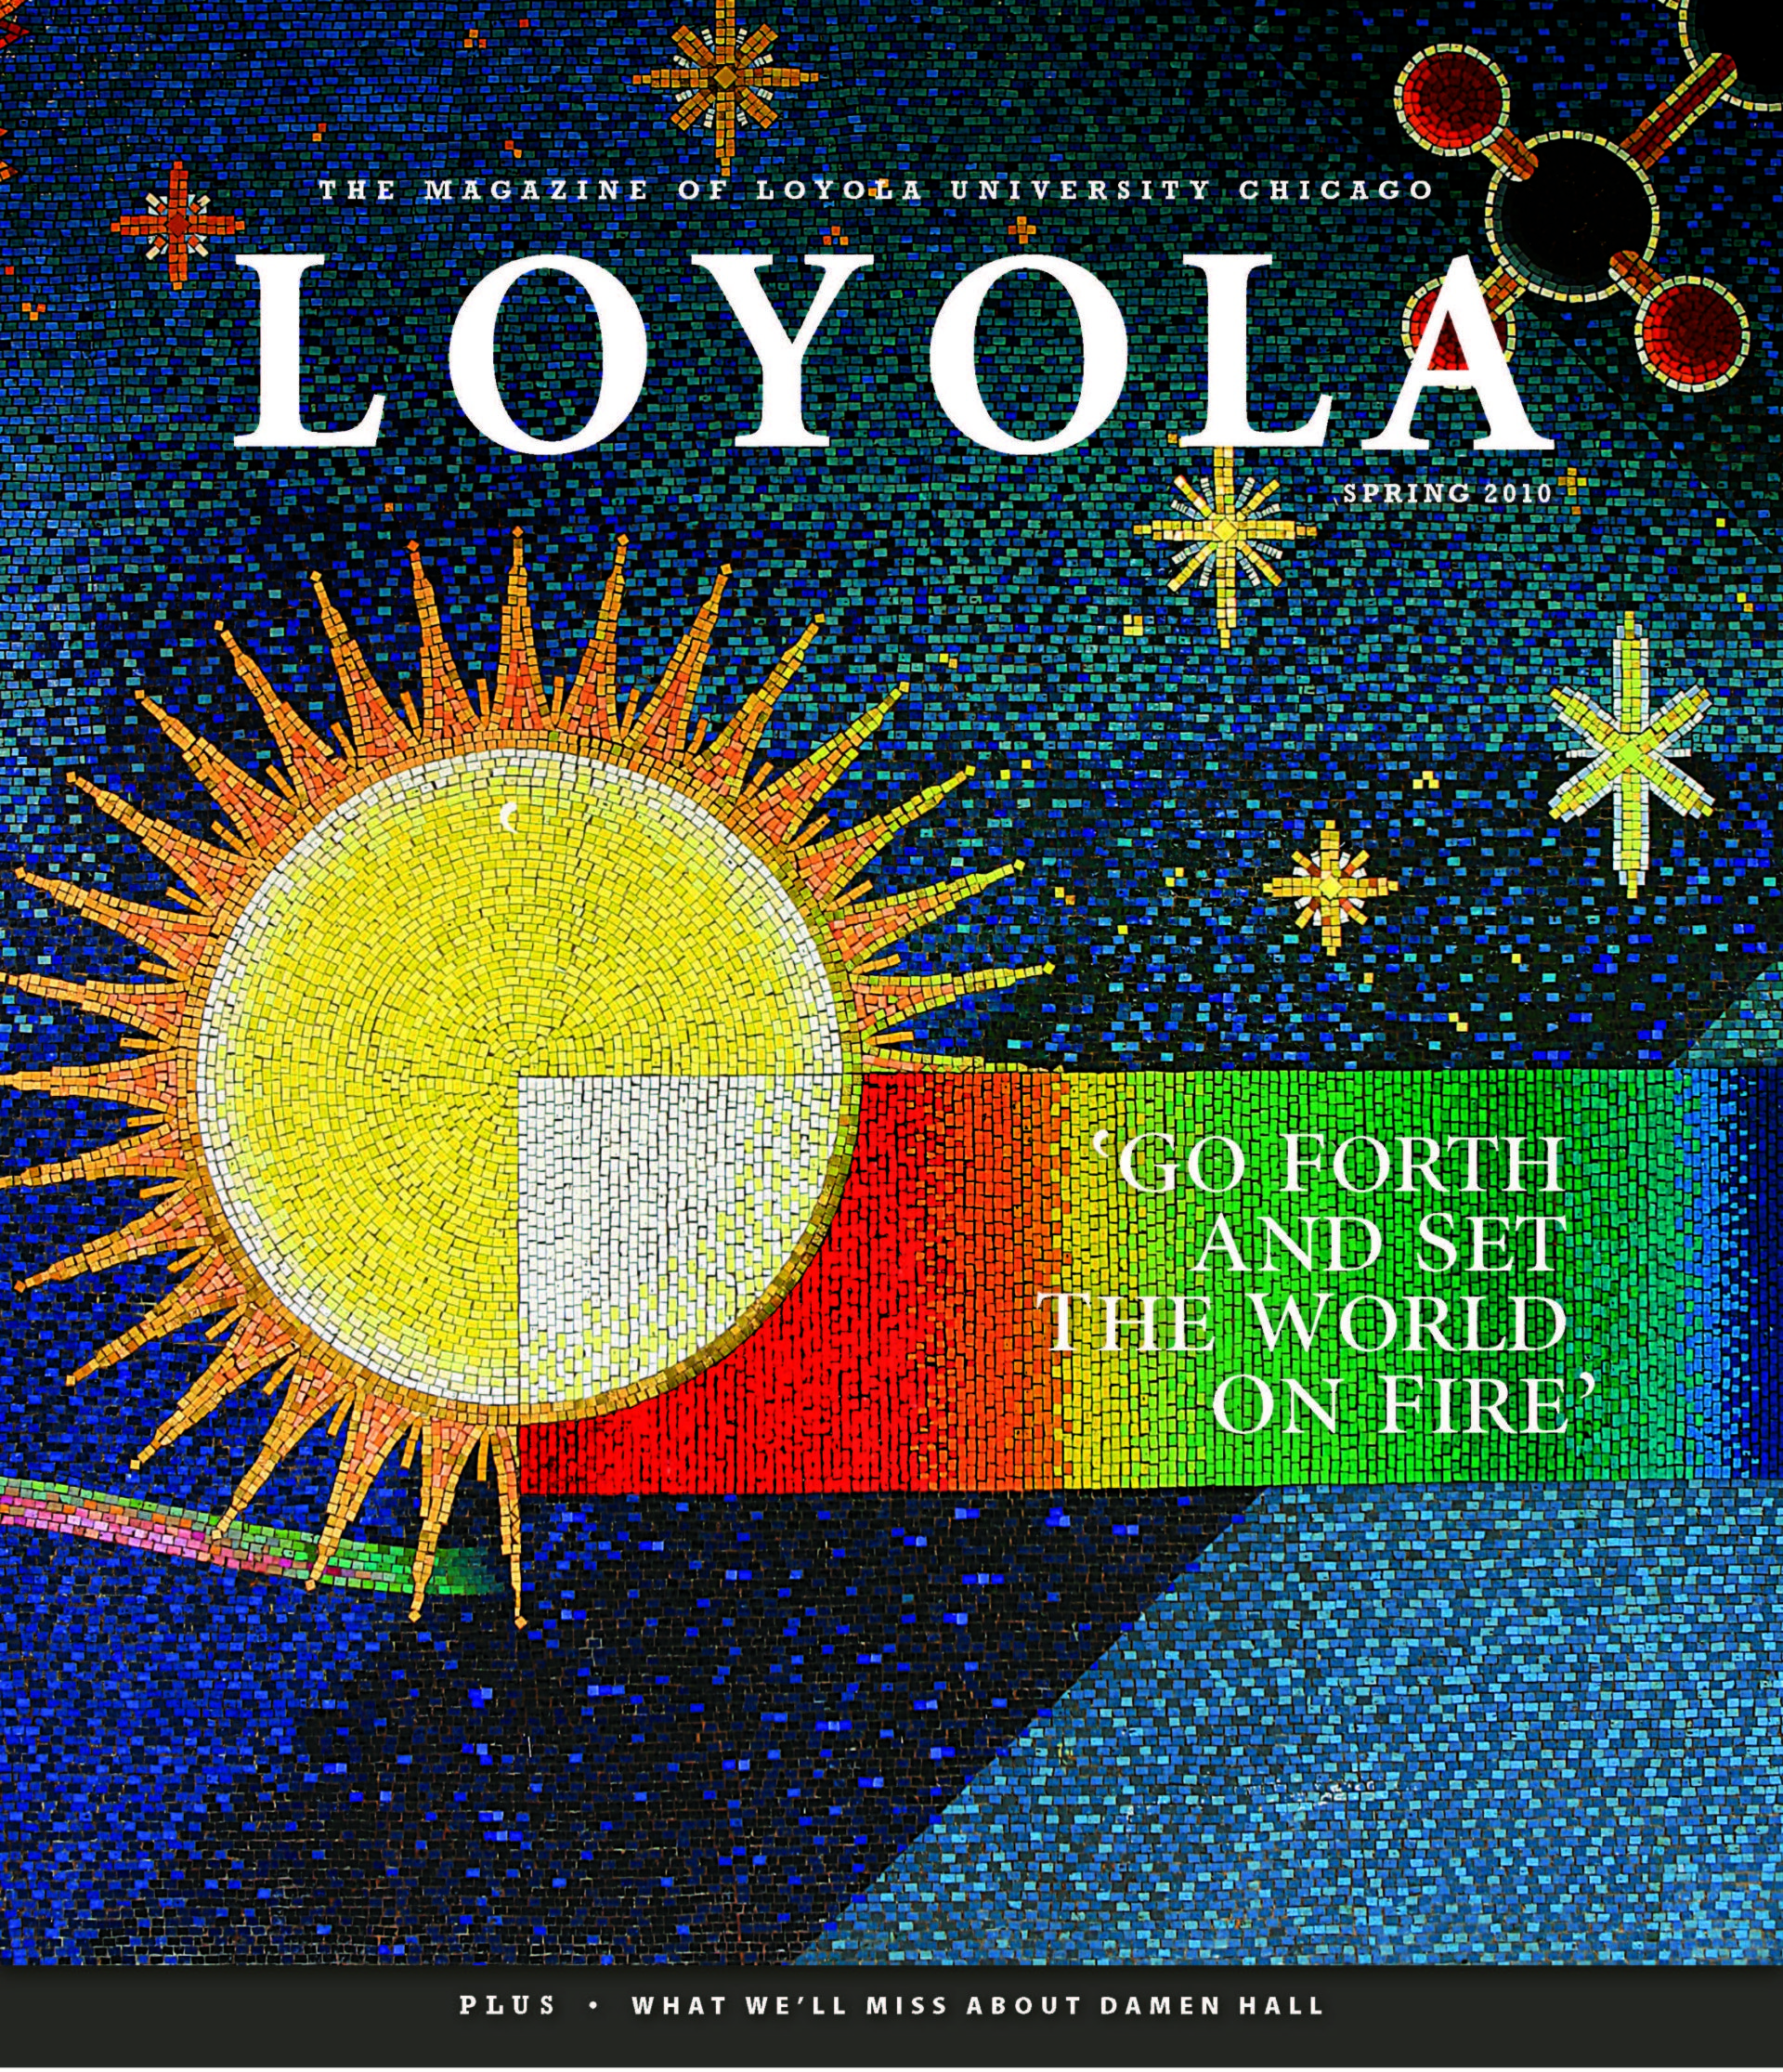 The Spring 2010 Loyola magazine cover shows a celestial tile illustration of the sun and stars and the text 'Go Forth and Set the World on Fire'